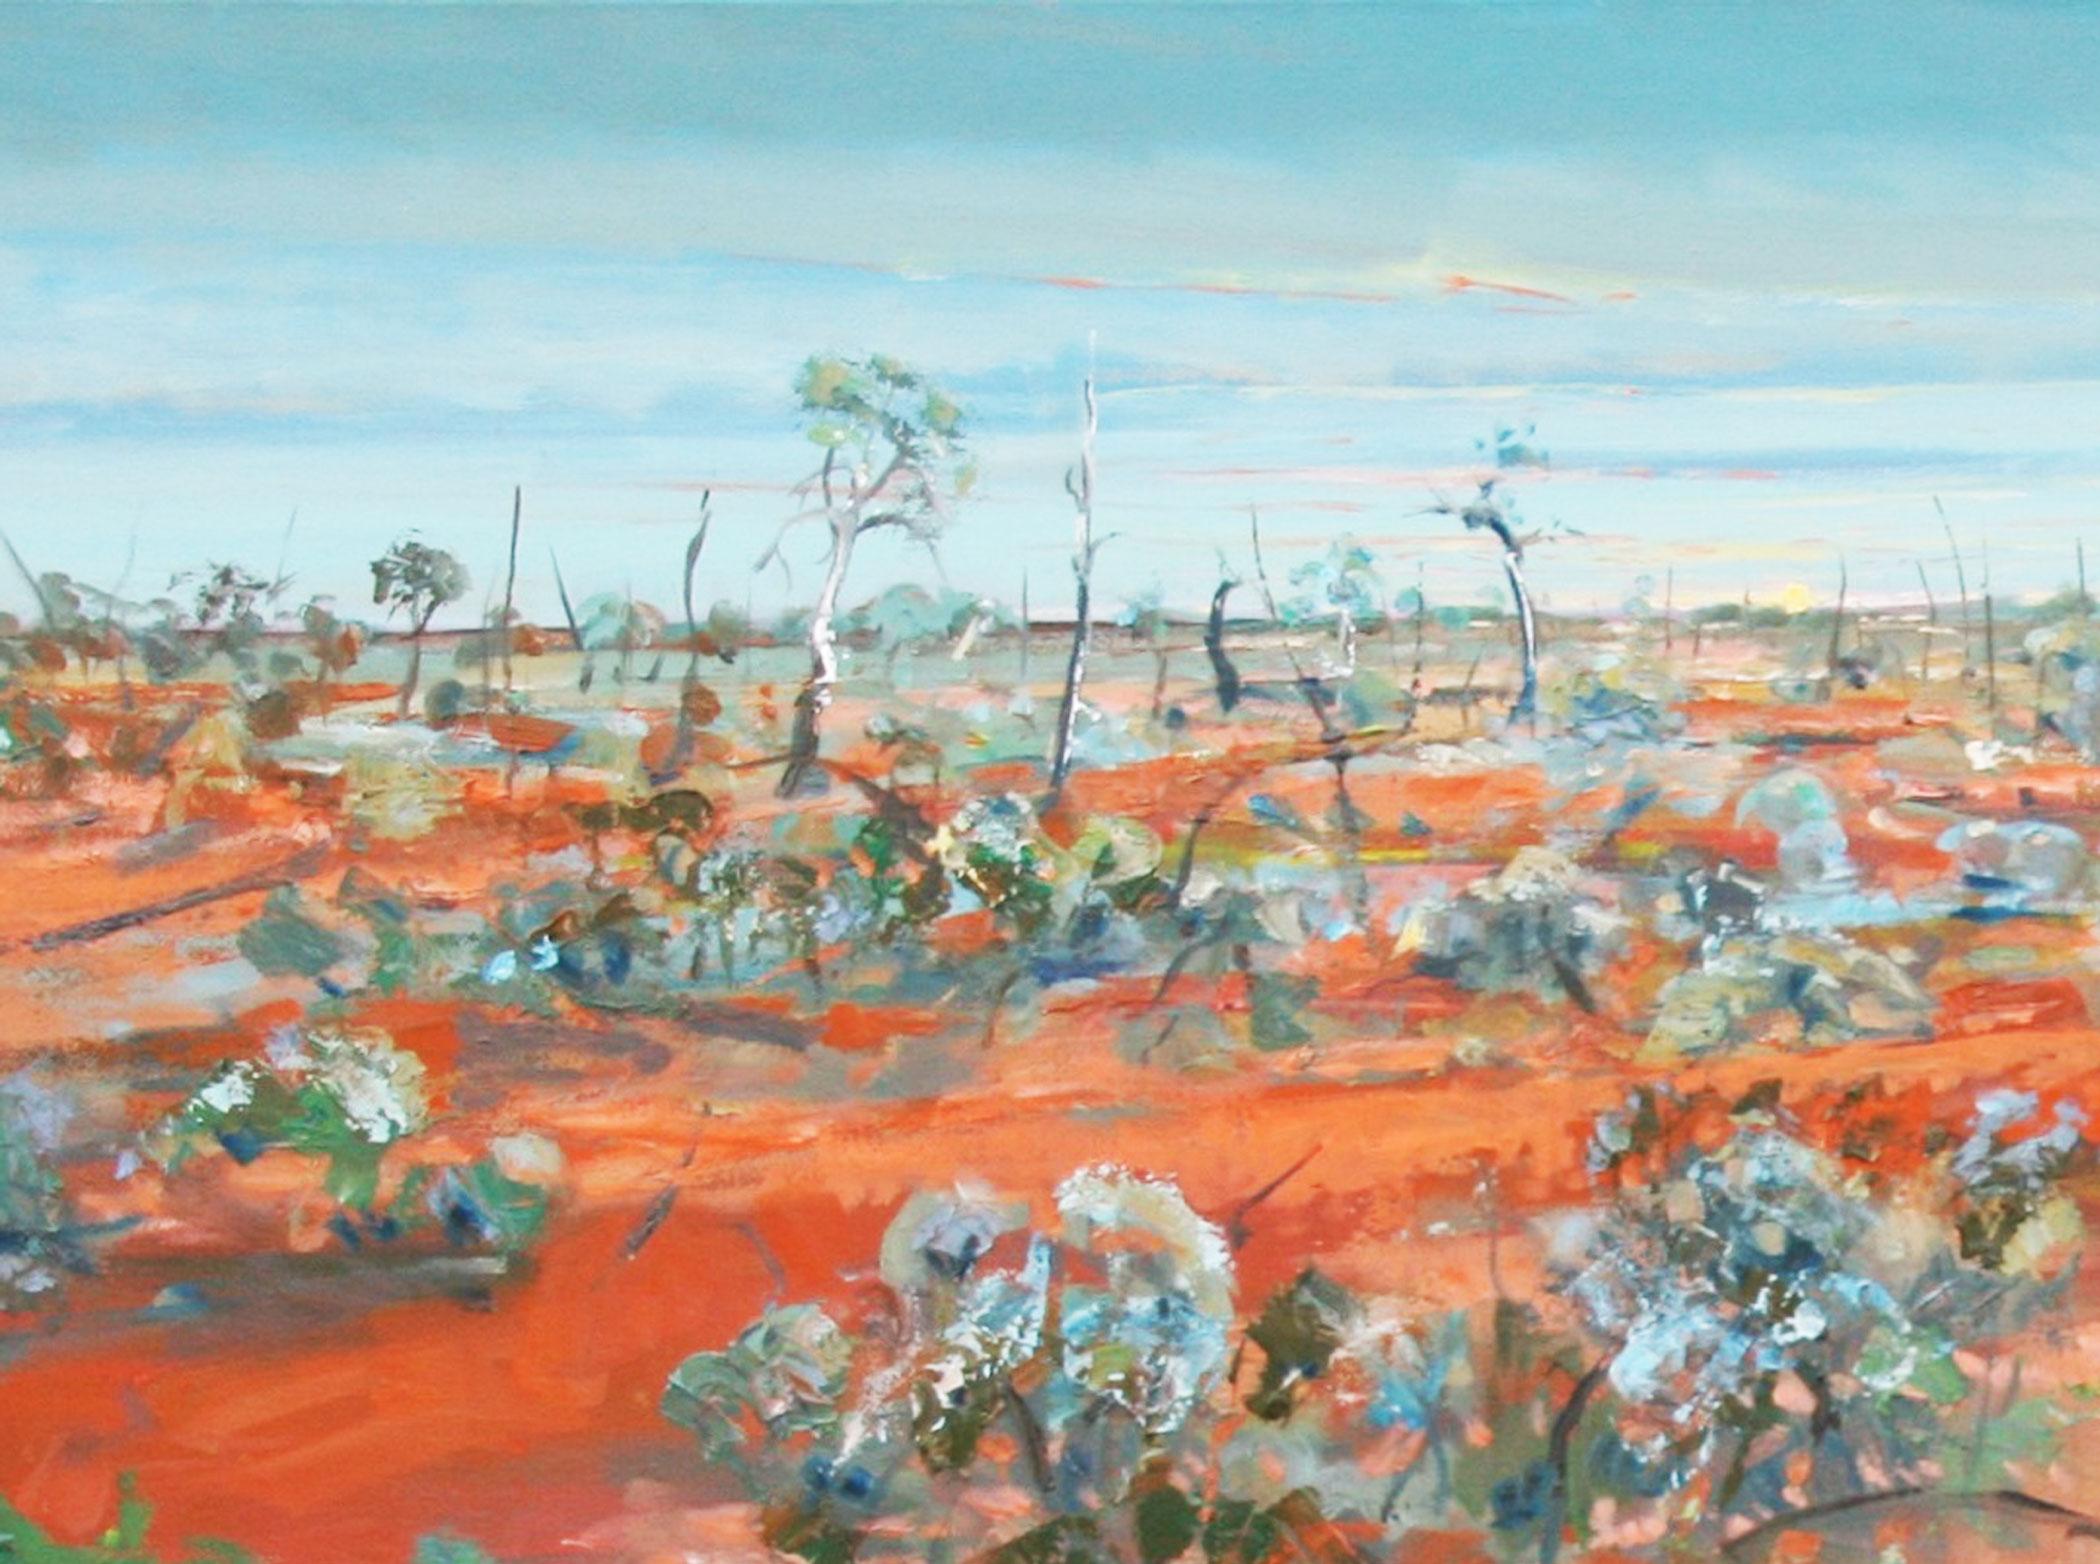 Ibis by Piers Bateman gives us an insight into the artist's abstract approach to capturing the beauty and sparsity of the Australian landscape. Bright and vivid red tones capture the sunburnt land and the clear, blue skies contrast to create a